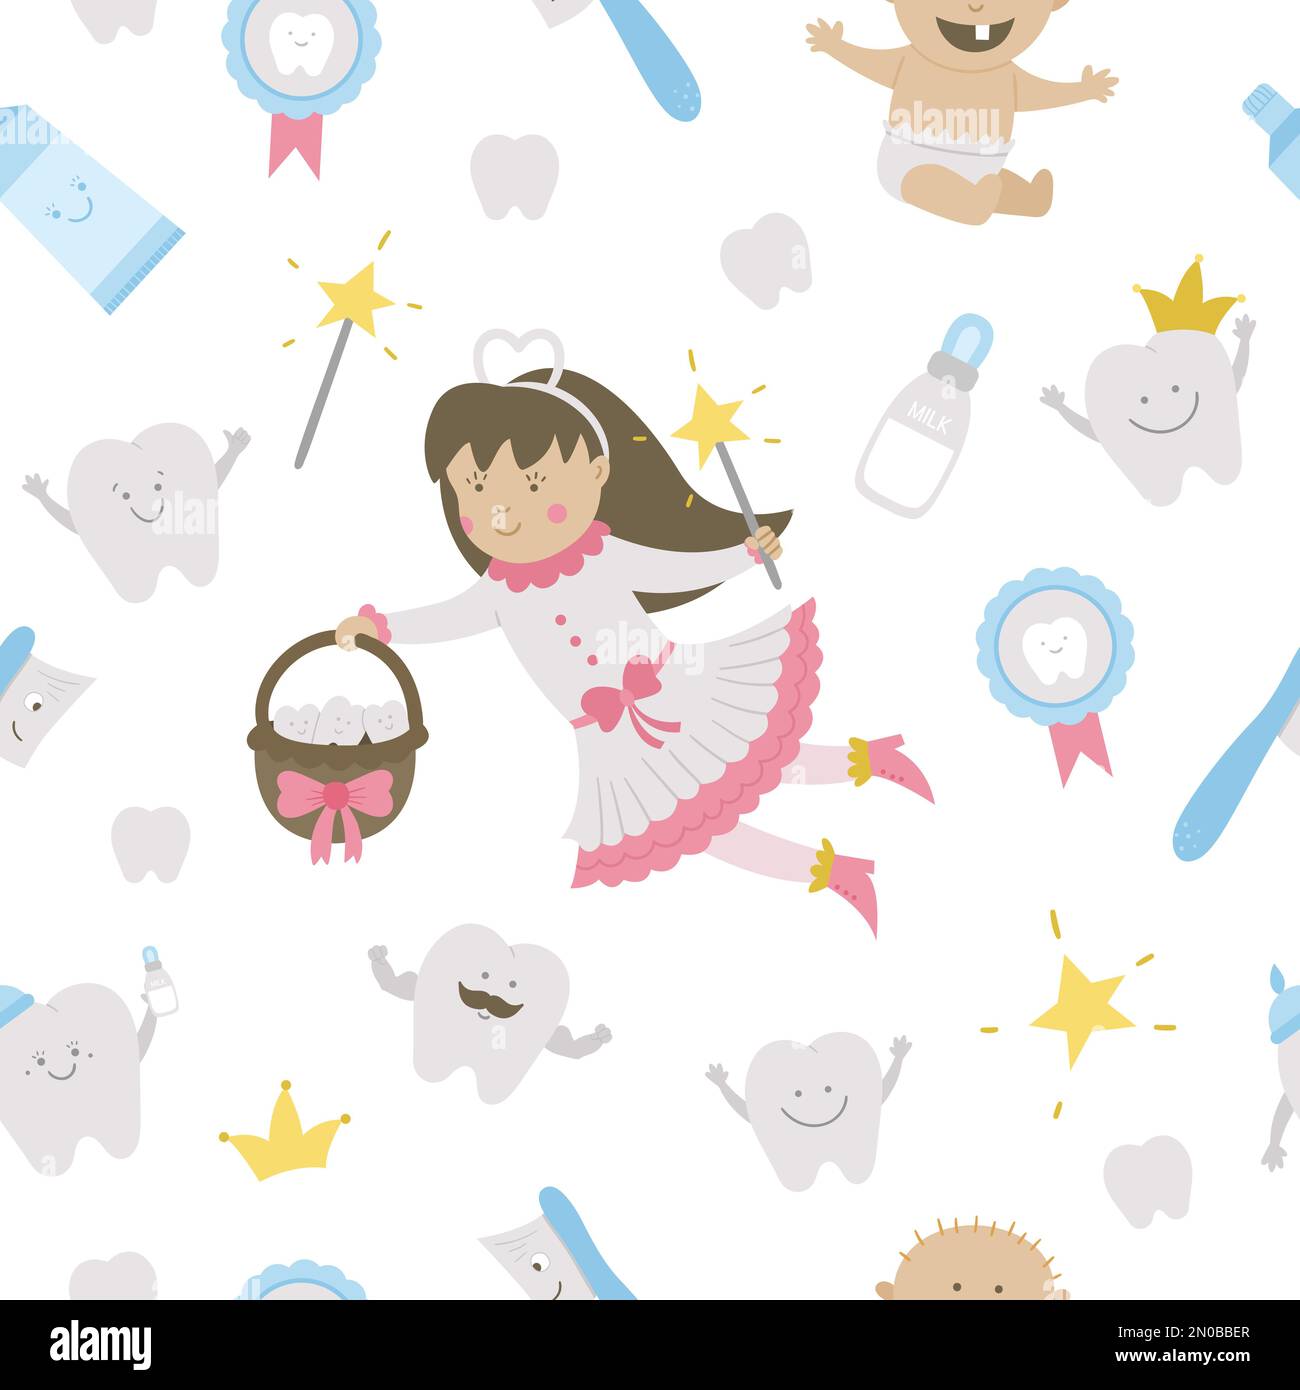 Cute tooth fairy seamless pattern. Kawaii fantasy princess background with funny smiling toothbrush, baby, molar, milk bottle, medal, toothpaste, teet Stock Vector